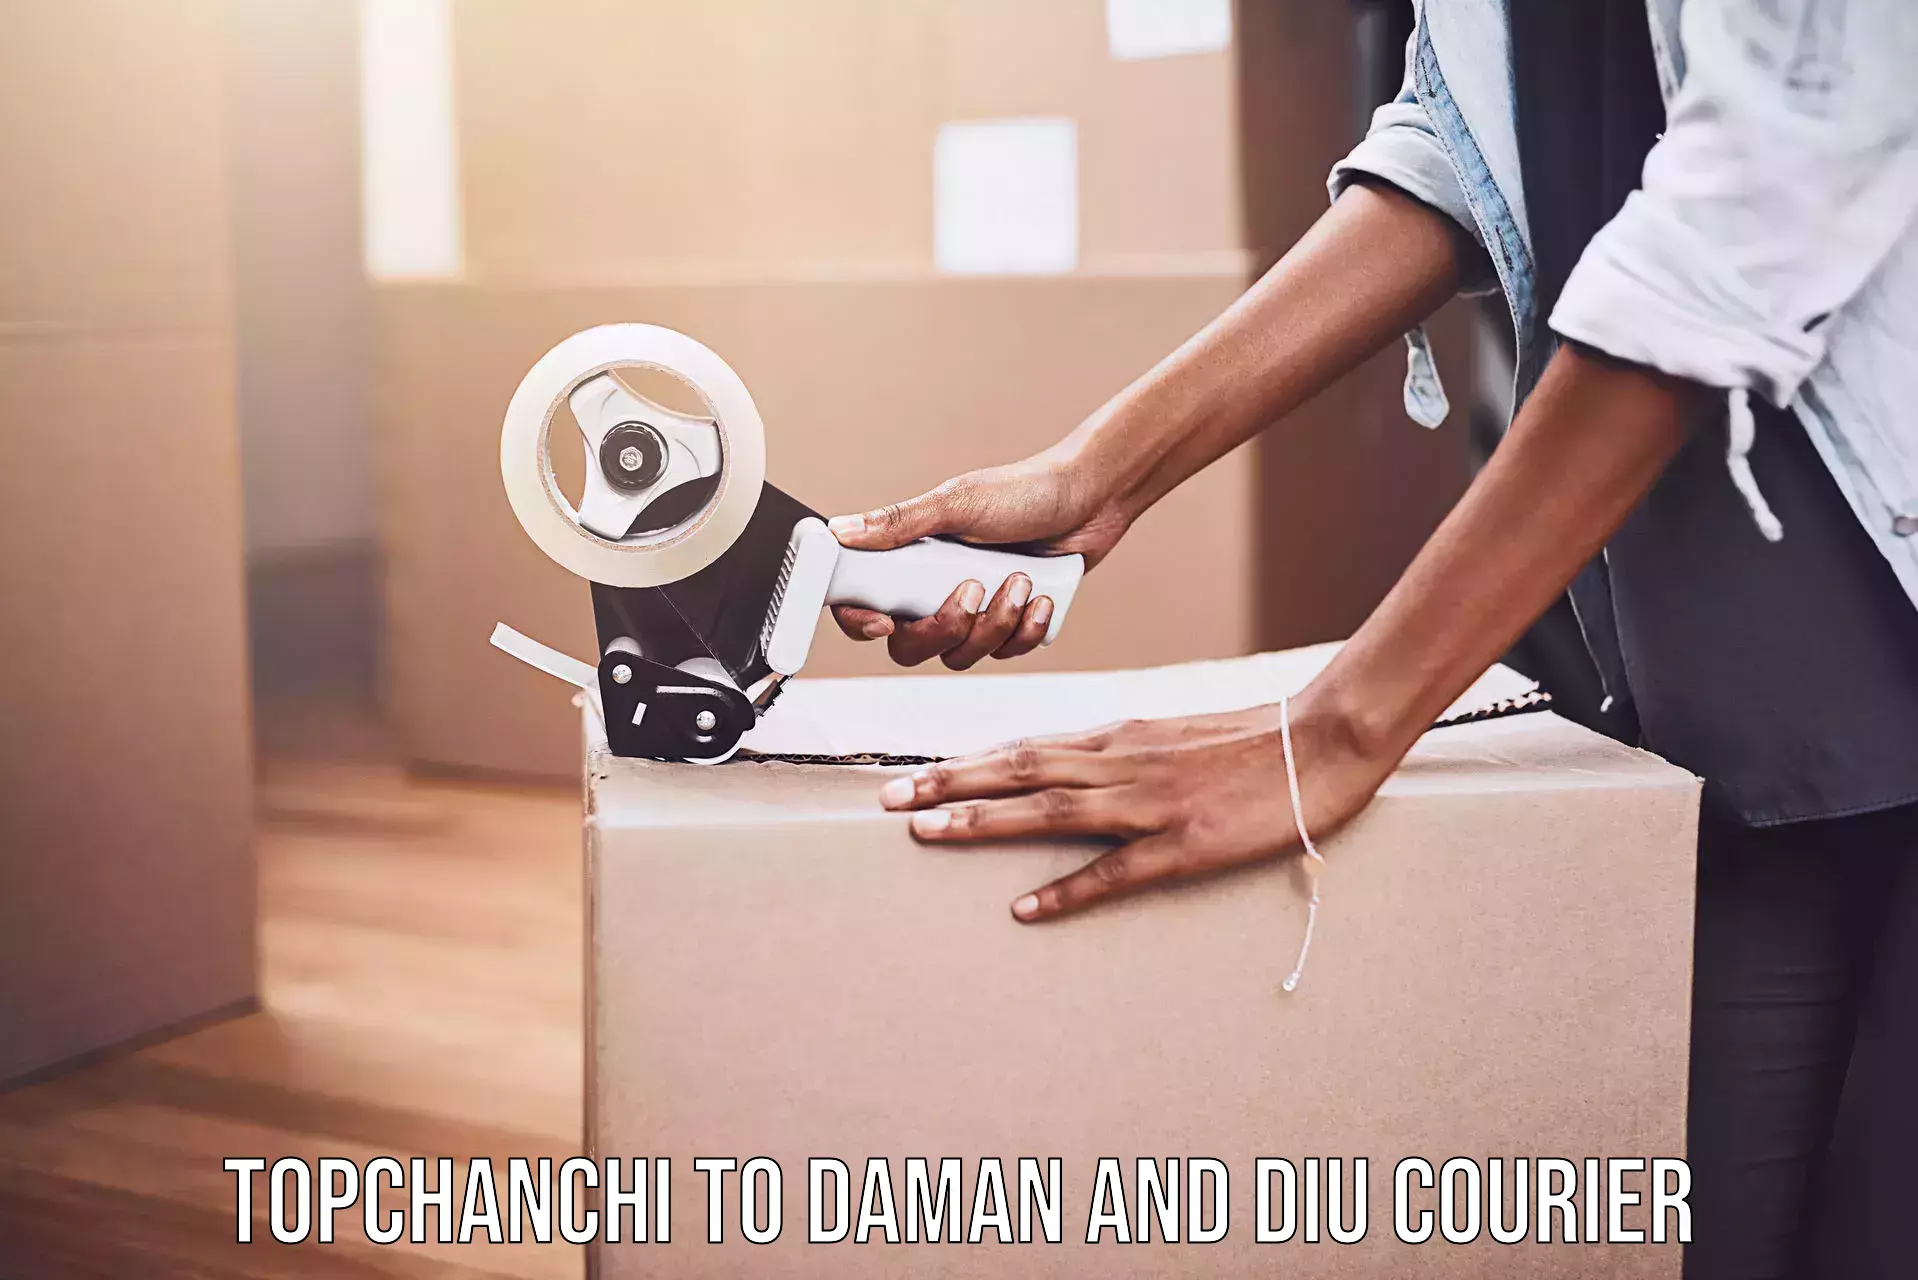 Next-day freight services Topchanchi to Daman and Diu